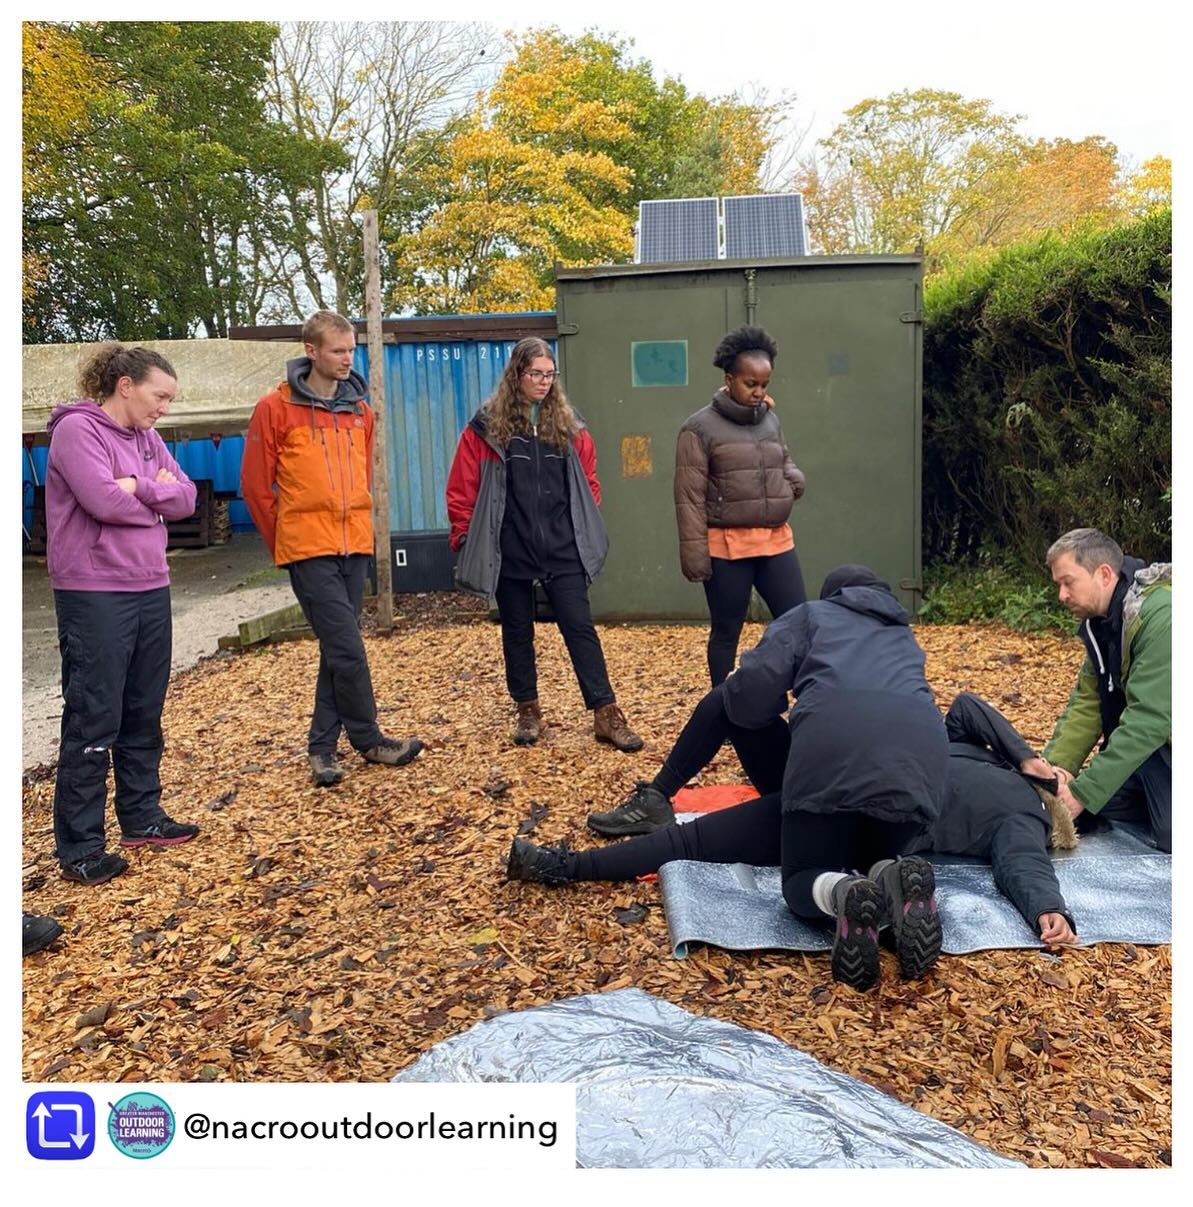 Repost from @nacrooutdoorlearning - Our volunteers and volunteers from other local organisations like @aspire2inspire_c and @bgh_uk had a great time learning and refreshing their first aid skills on our 2 Day Outdoor First Aid course with @wilderness_development this weekend. Huge congratulations to all the candidates.